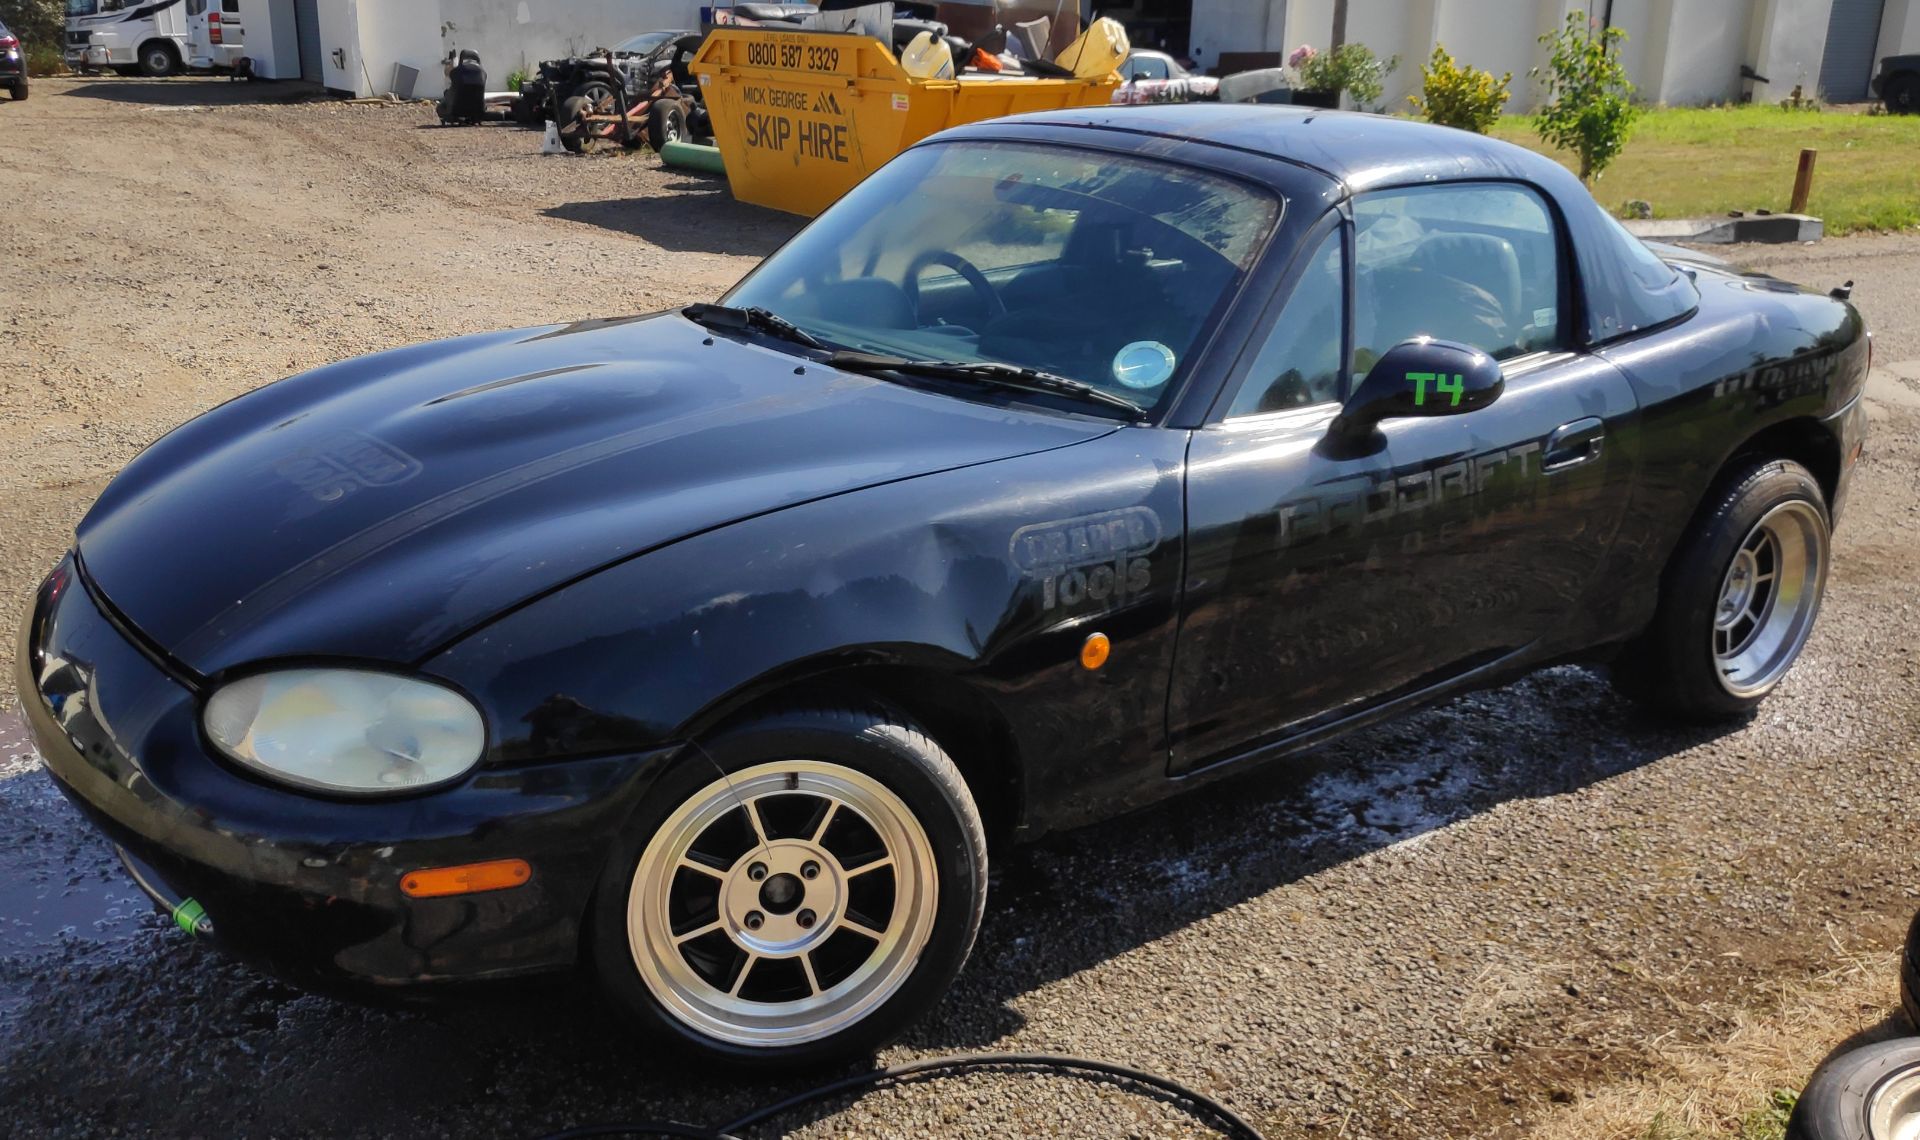 1 x 2000 Mazda MX5 Mk2 Drift Car - Includes 3 Extra Wheels/Tyres - Ref: T4 - CL682 - Location: Bedfo - Image 15 of 77